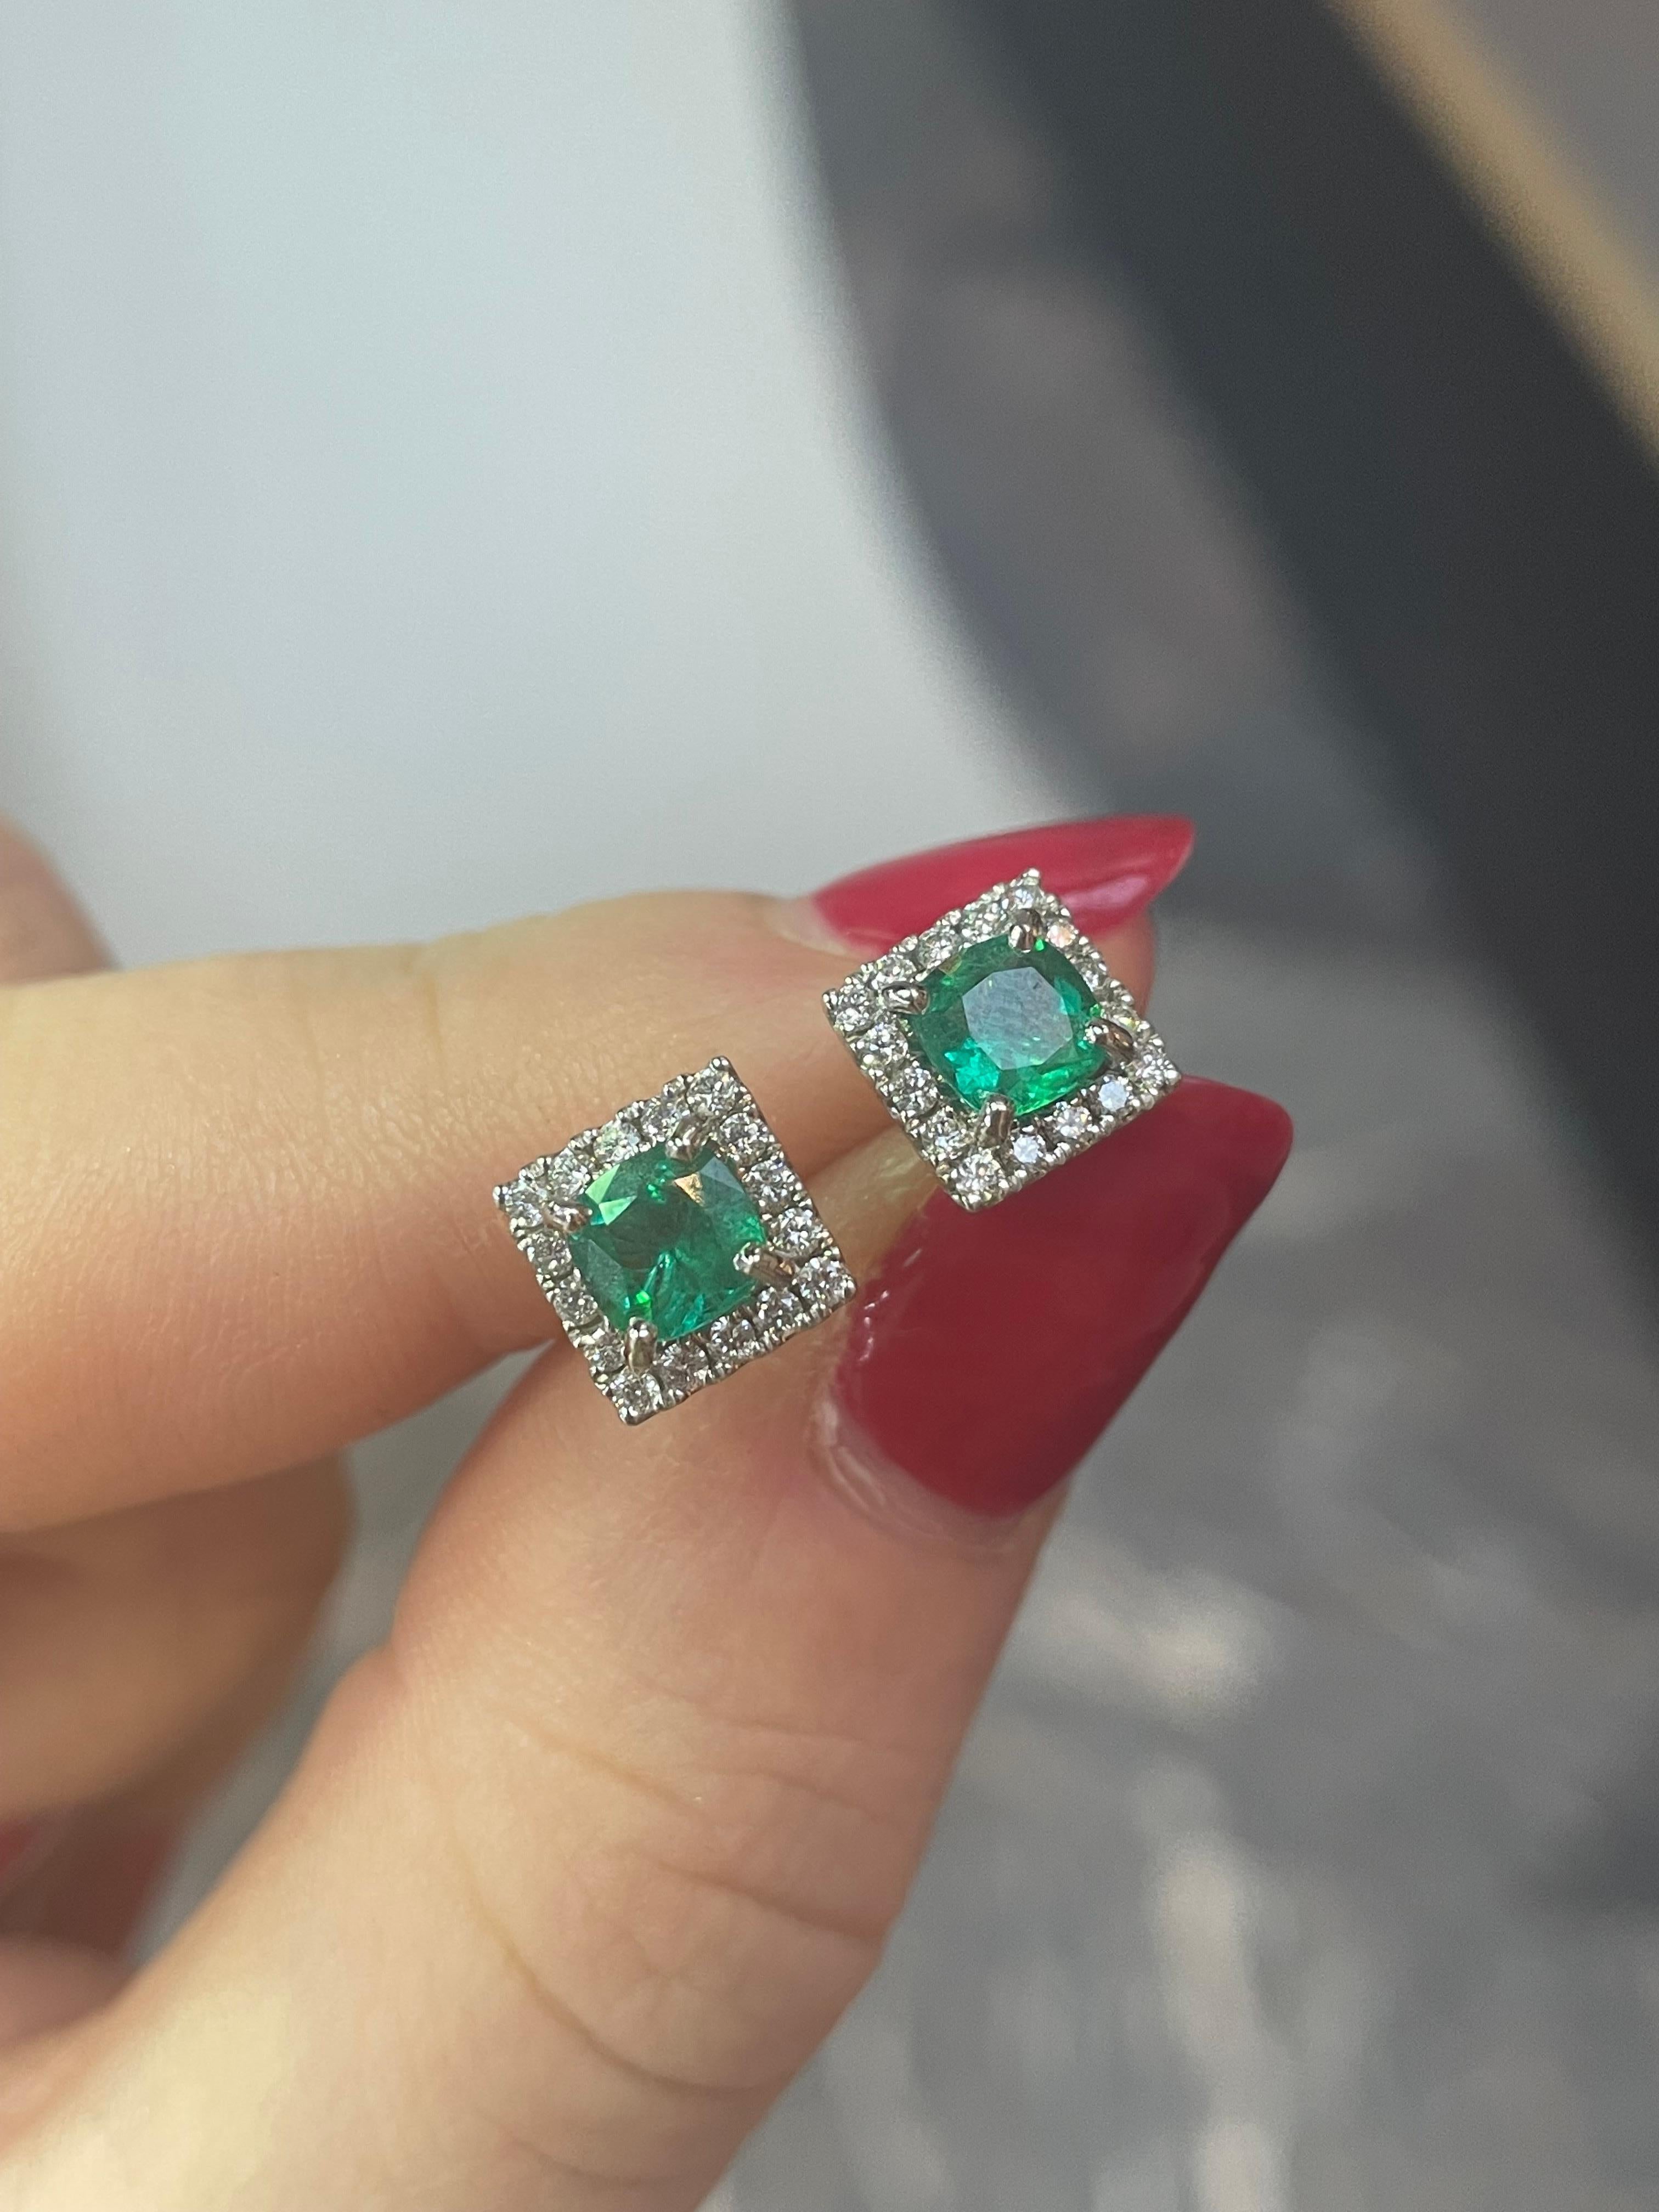 A pair of cushion cut emerald and diamond cluster earrings in 18 karat white gold.

Each earring is set to its centre with a beautiful cushion cut emerald of a vibrant colour. The emerald is set within a sparkling diamond set cluster of round